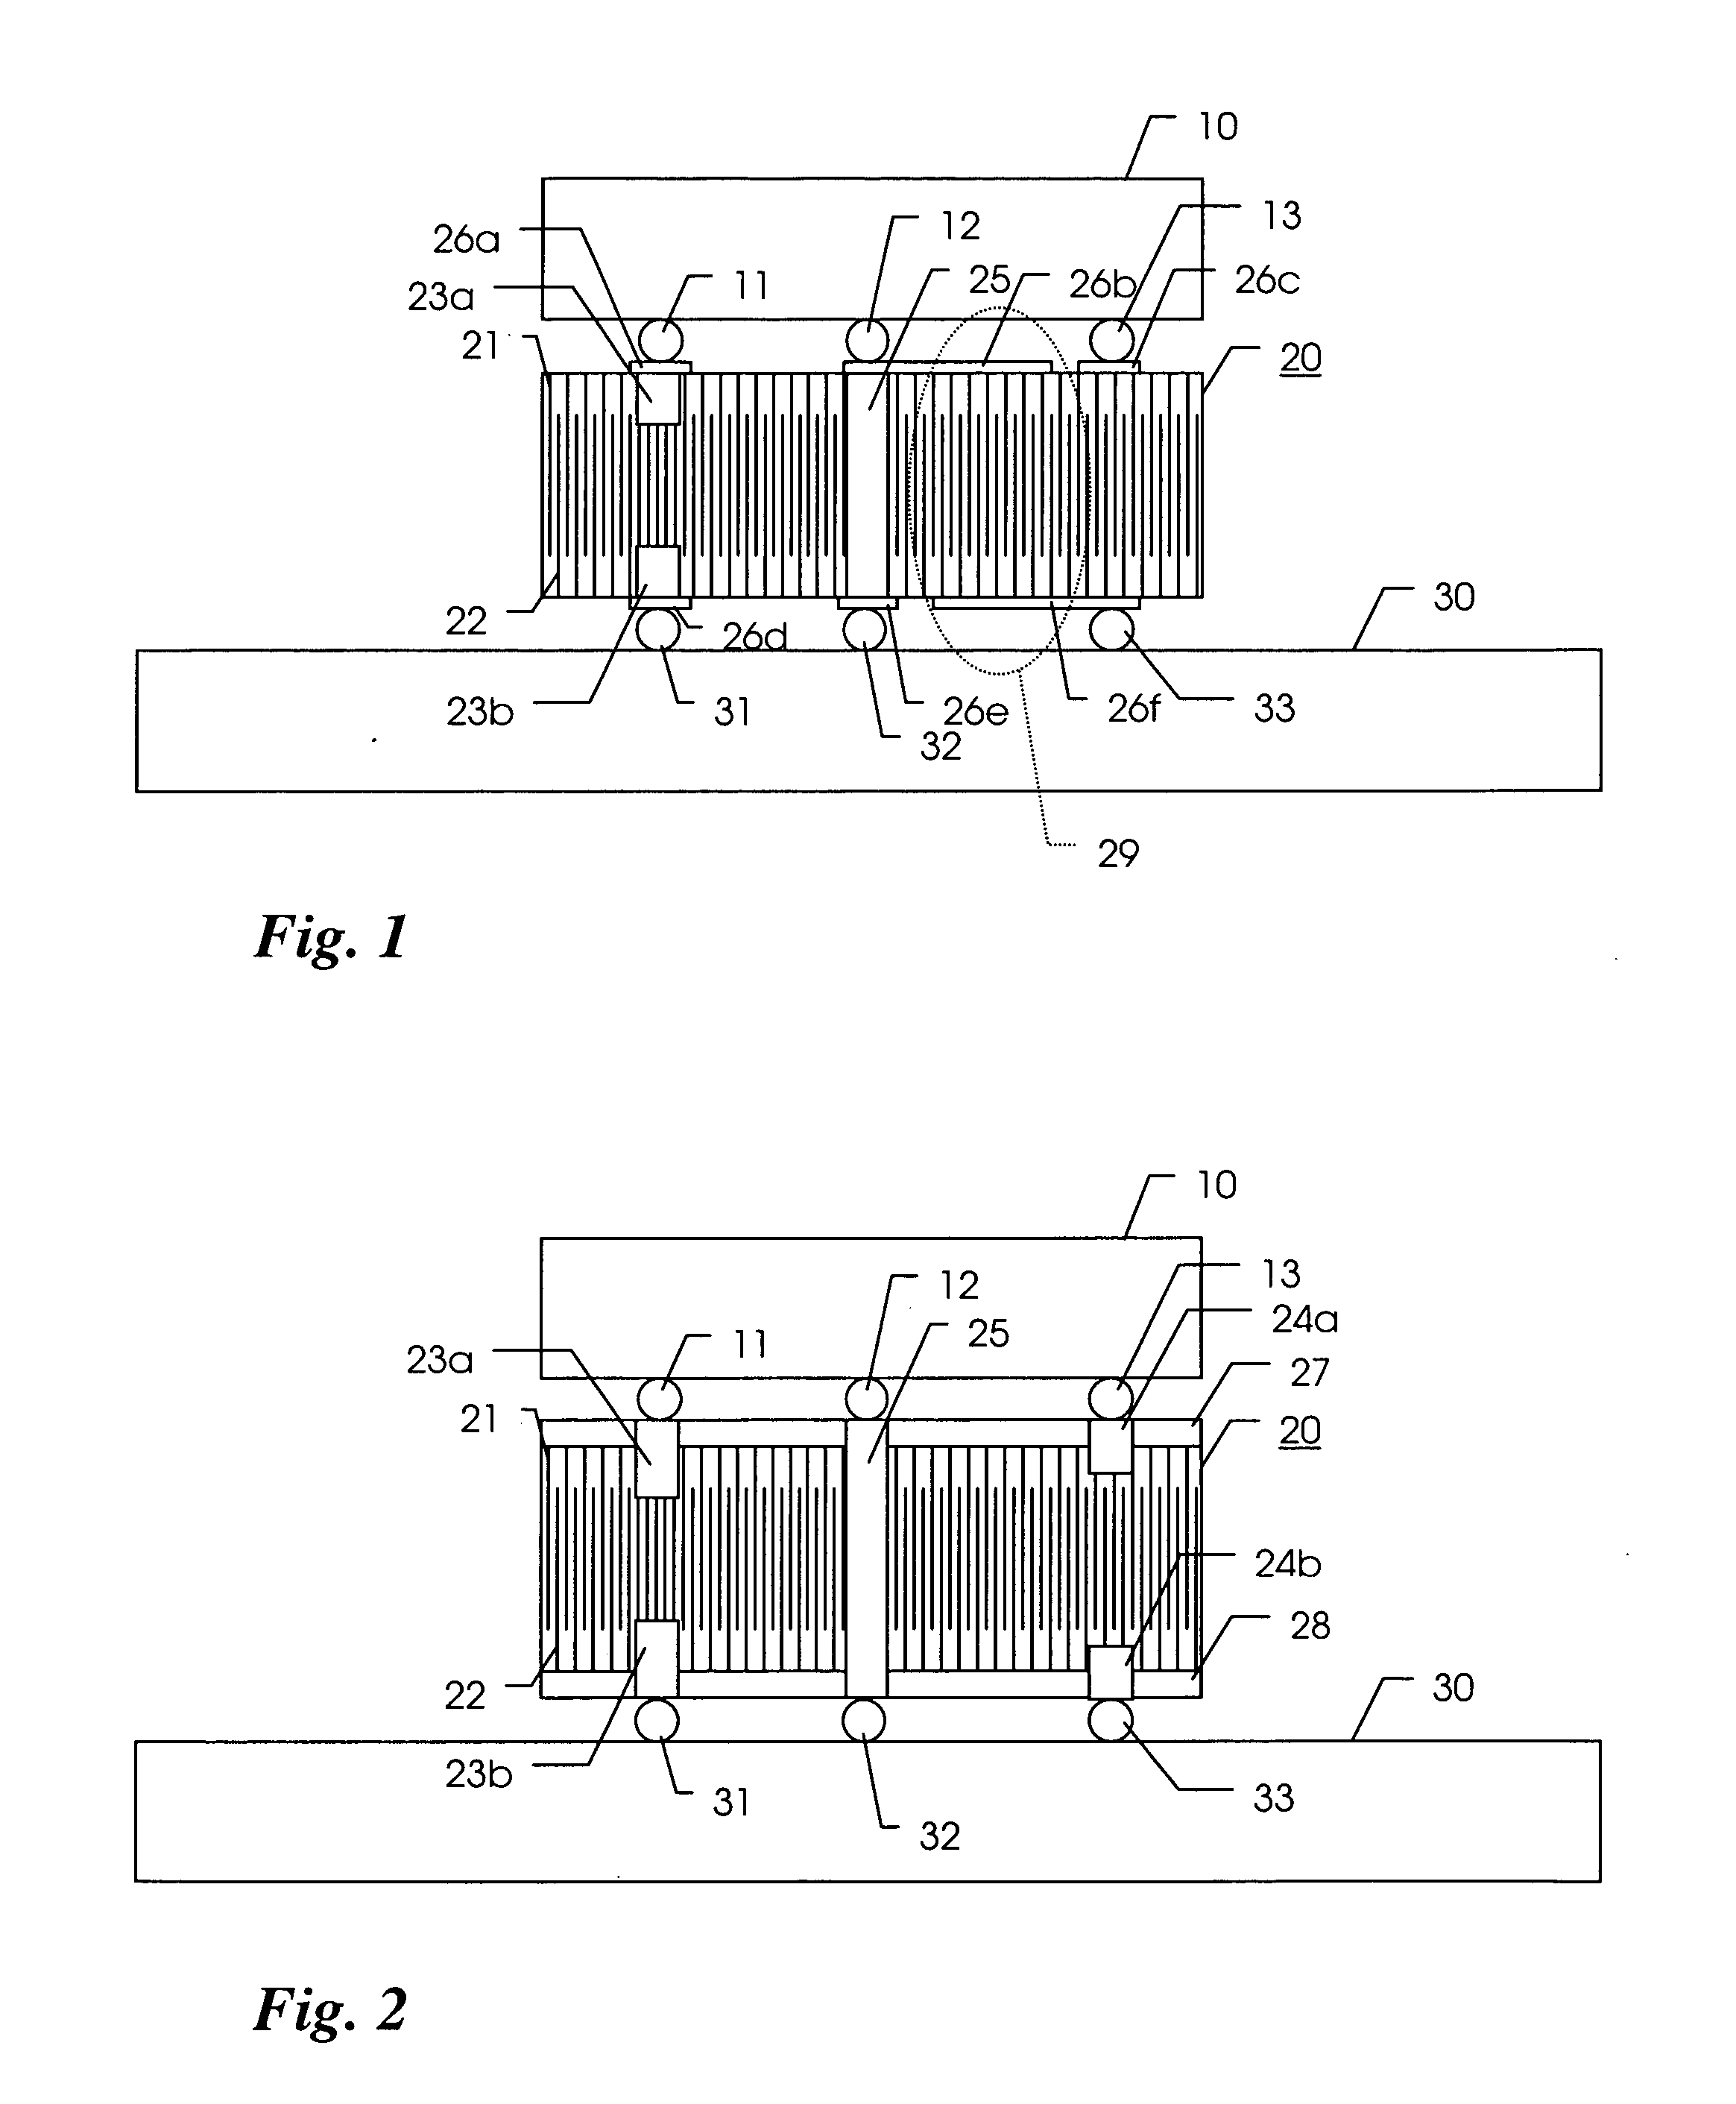 Interposer for decoupling integrated circuits on a circuit board